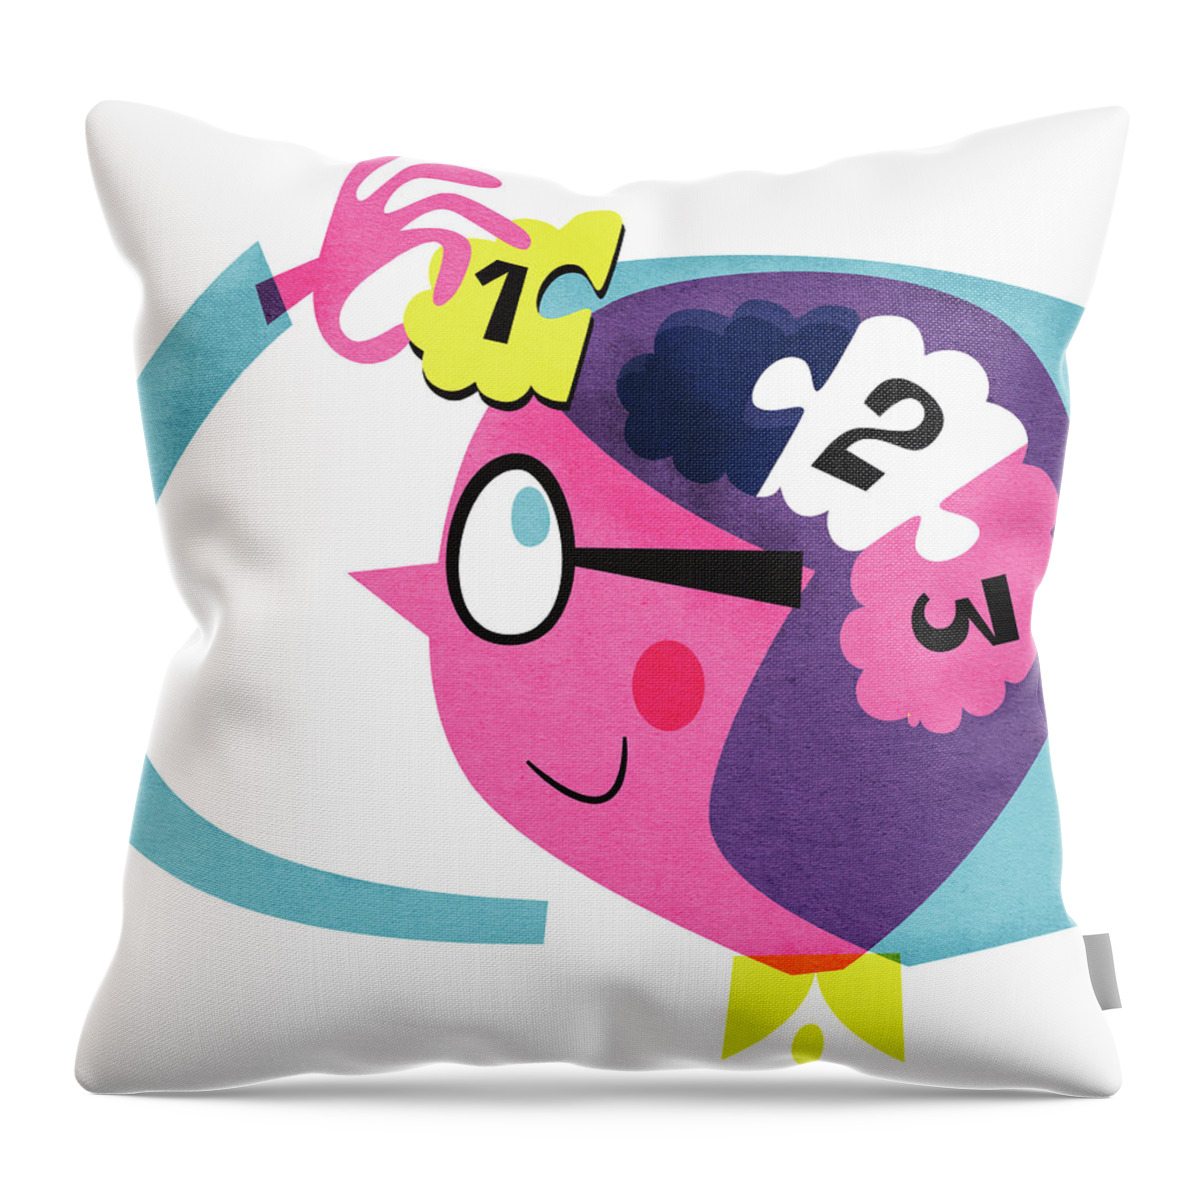 30-35 Throw Pillow featuring the photograph Woman Connecting Numbered Jigsaw Puzzle by Ikon Ikon Images